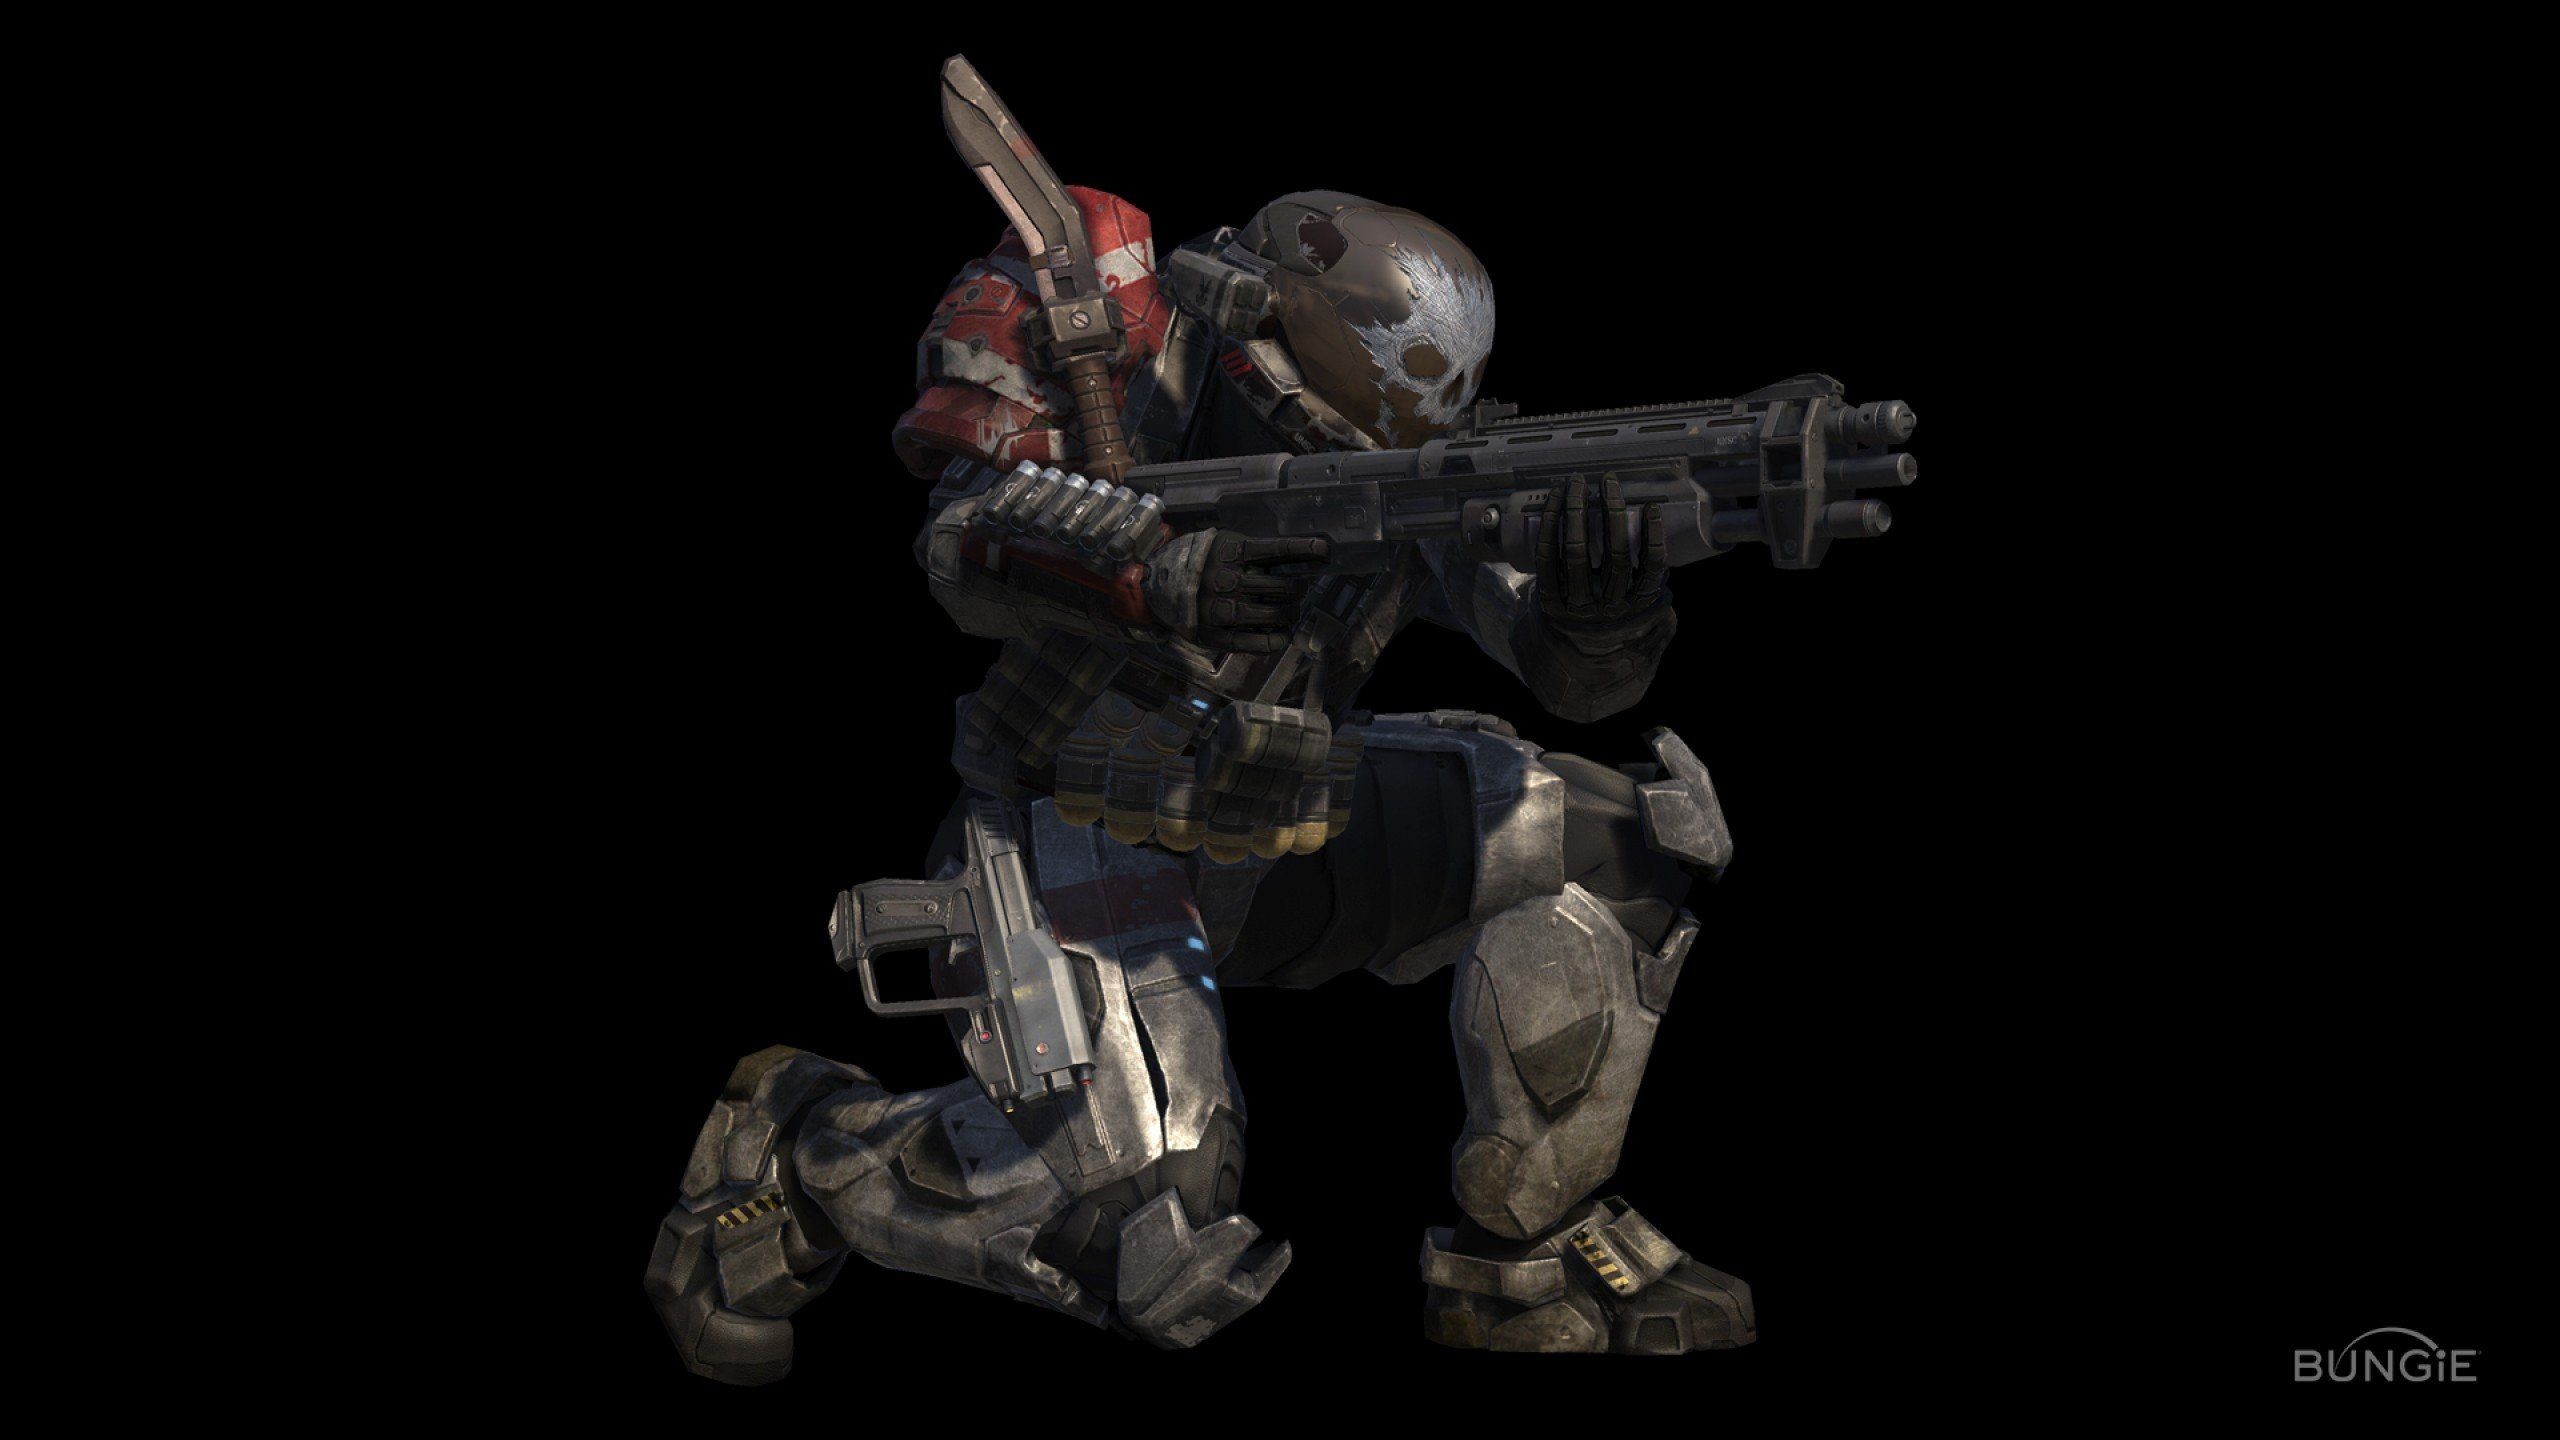 Halo Reach Emile Wallpapers.